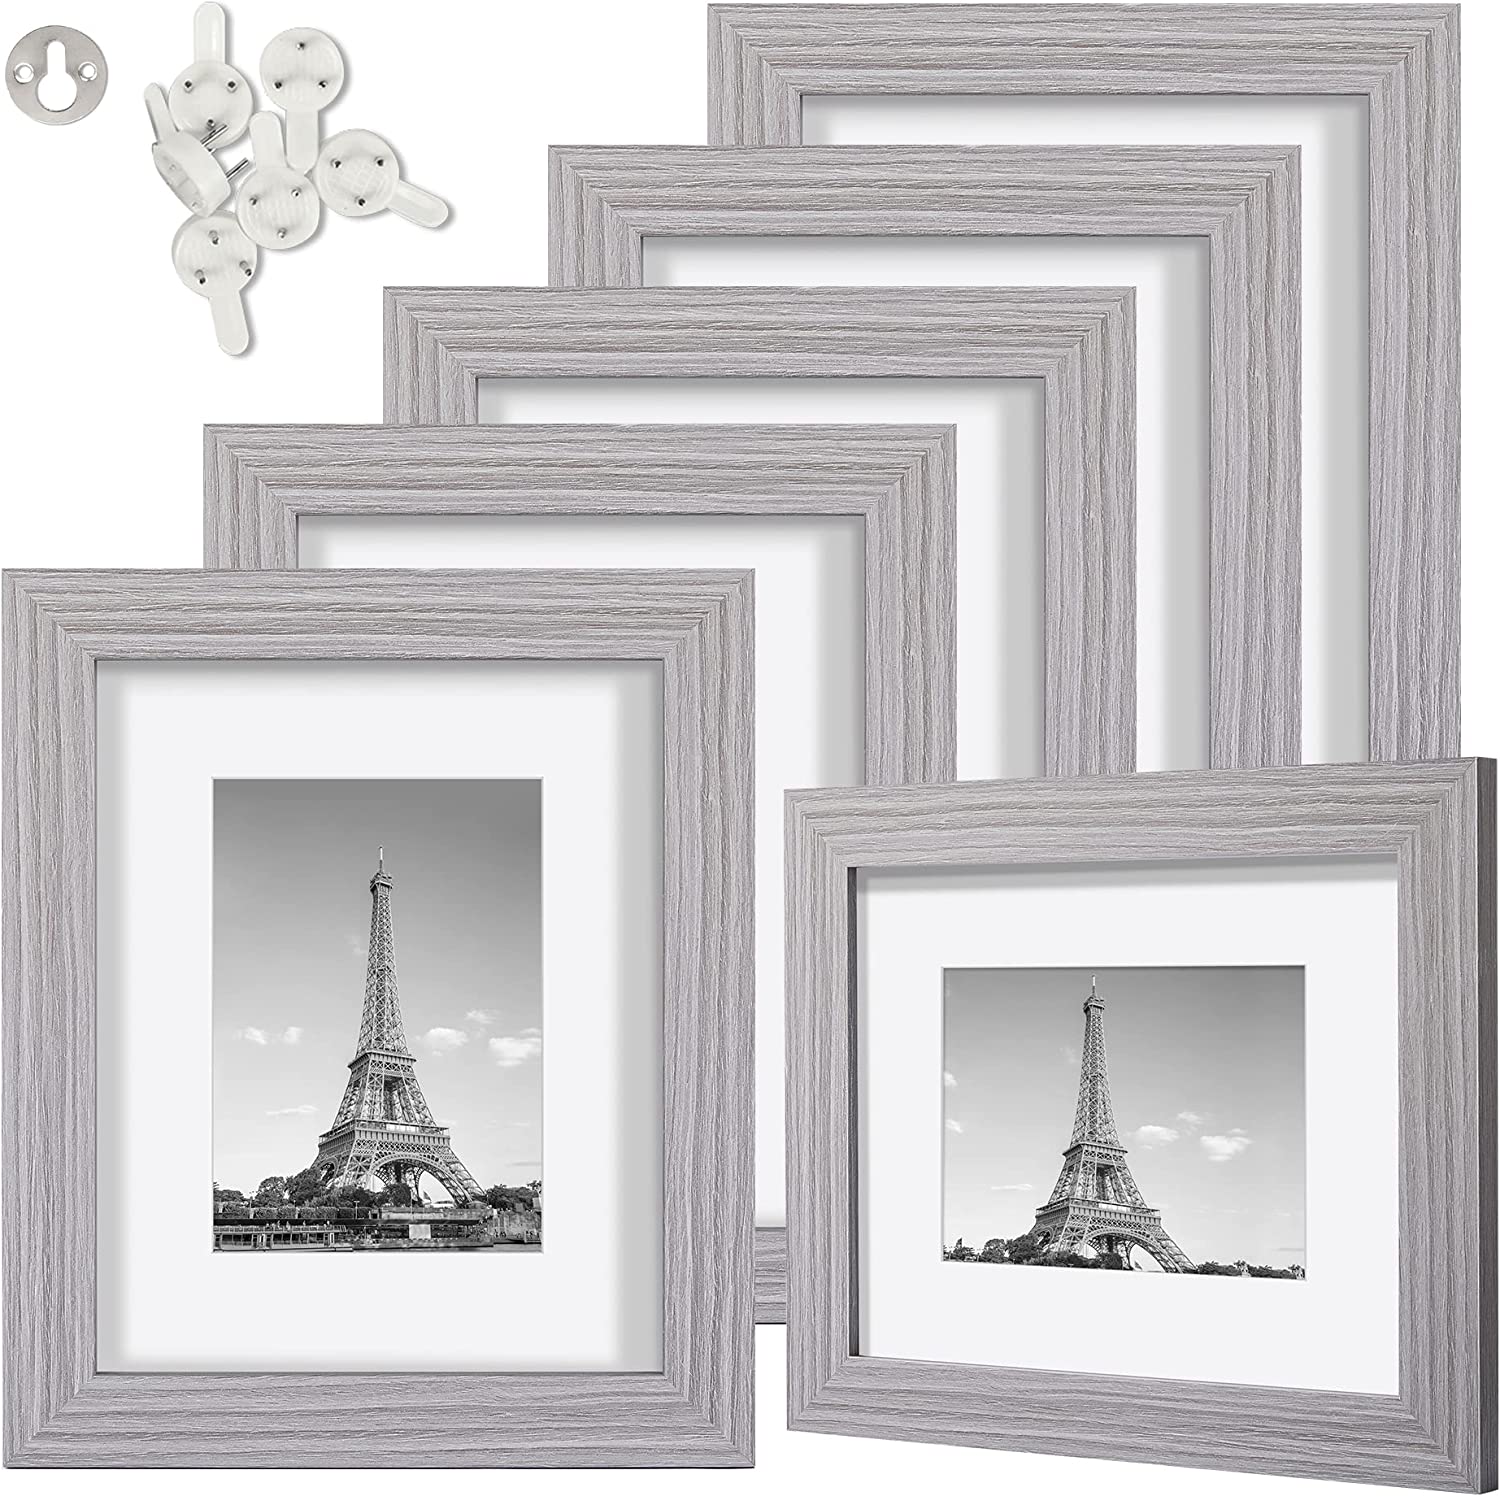 upsimples 12x12 Picture Frame Set of 3, Display Pictures 8x8 with Mat or  12x12 Without Mat, Multi Photo Frames Collage for Wall, Dark Gray